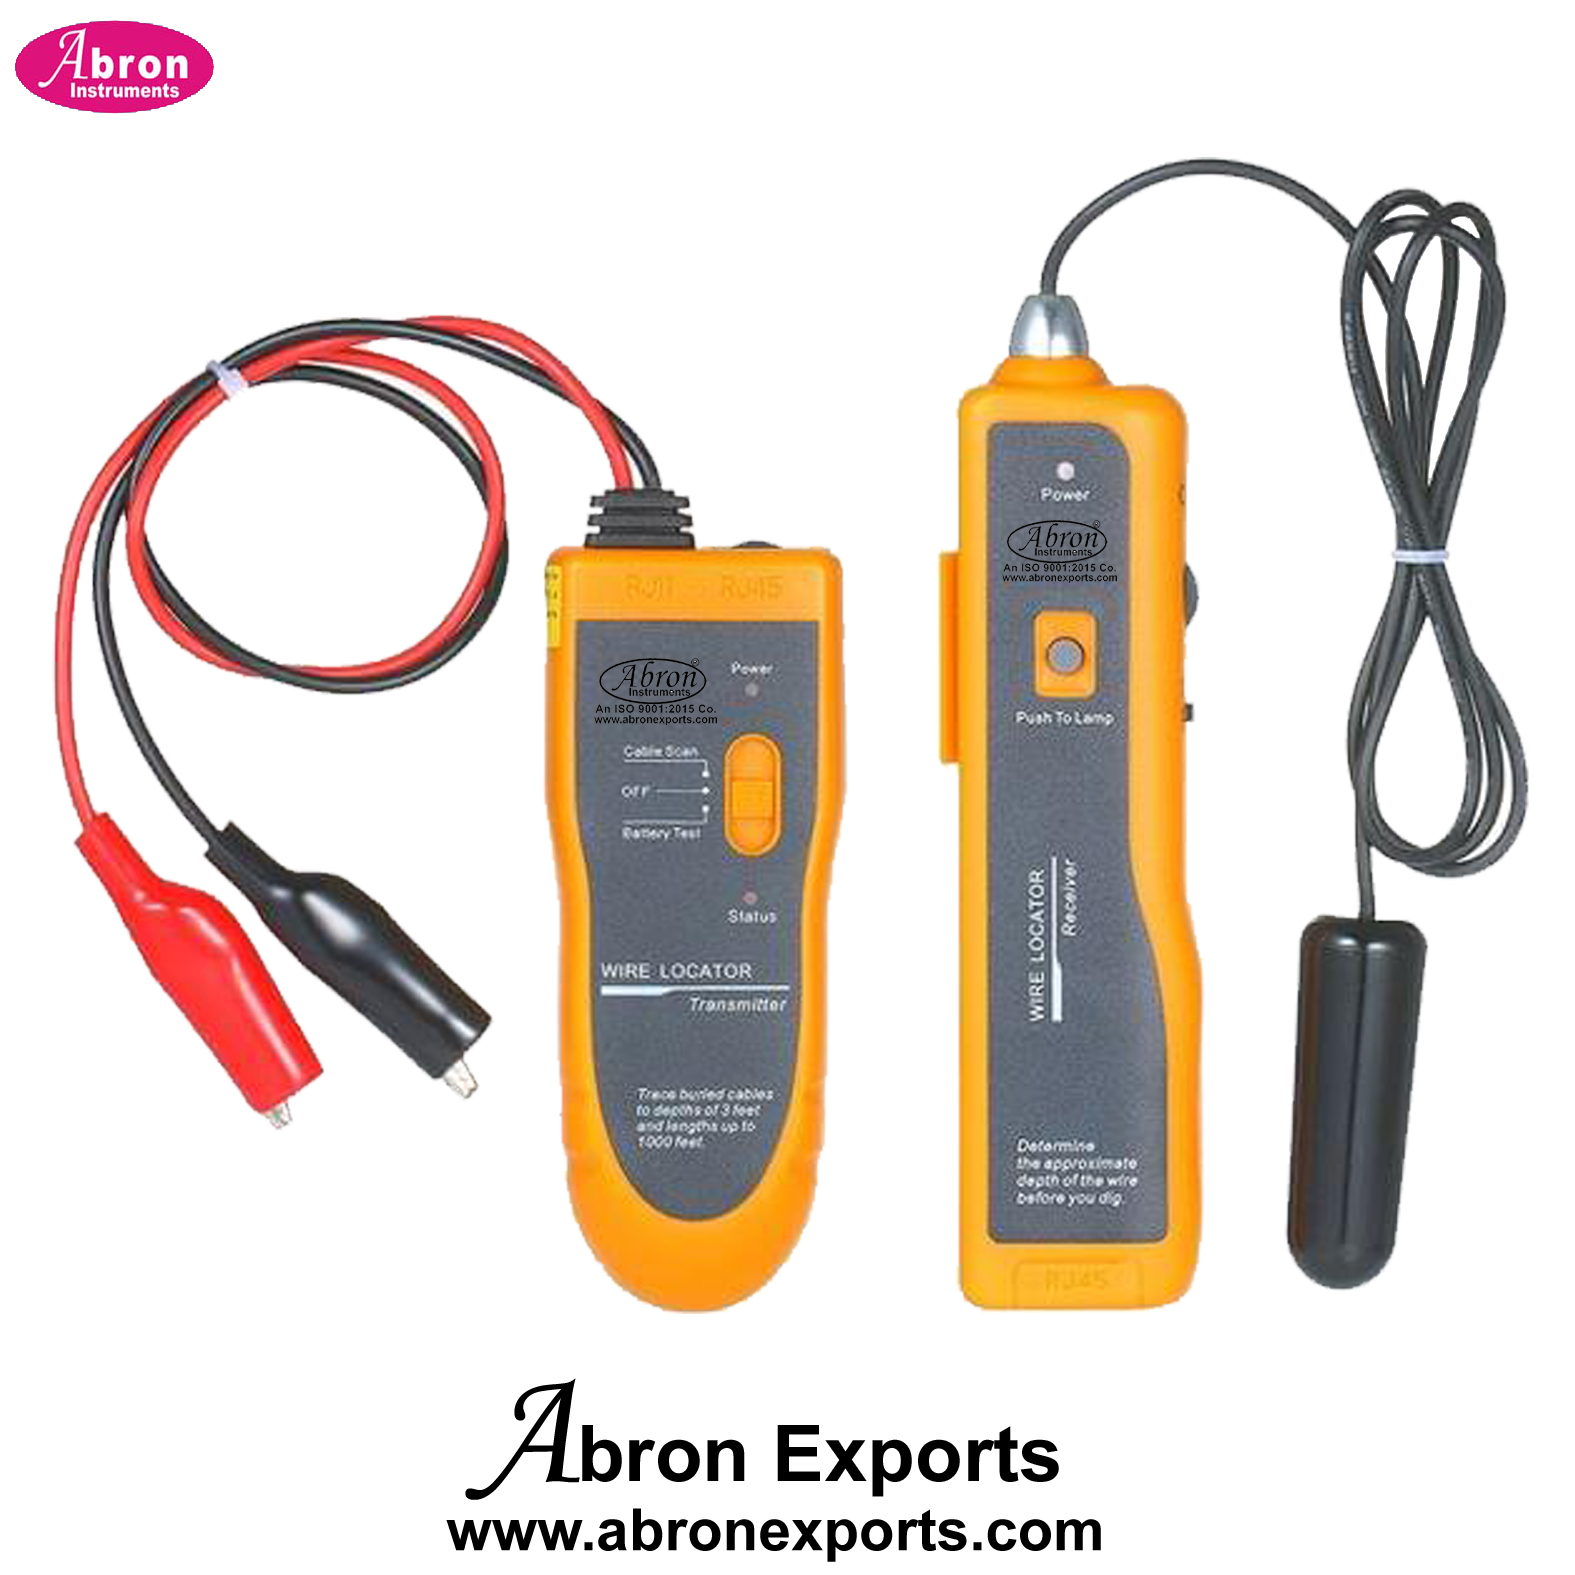 Cable Fault Locator Digital Portable Handy With Connecting Wires Abron AE-1217CD 